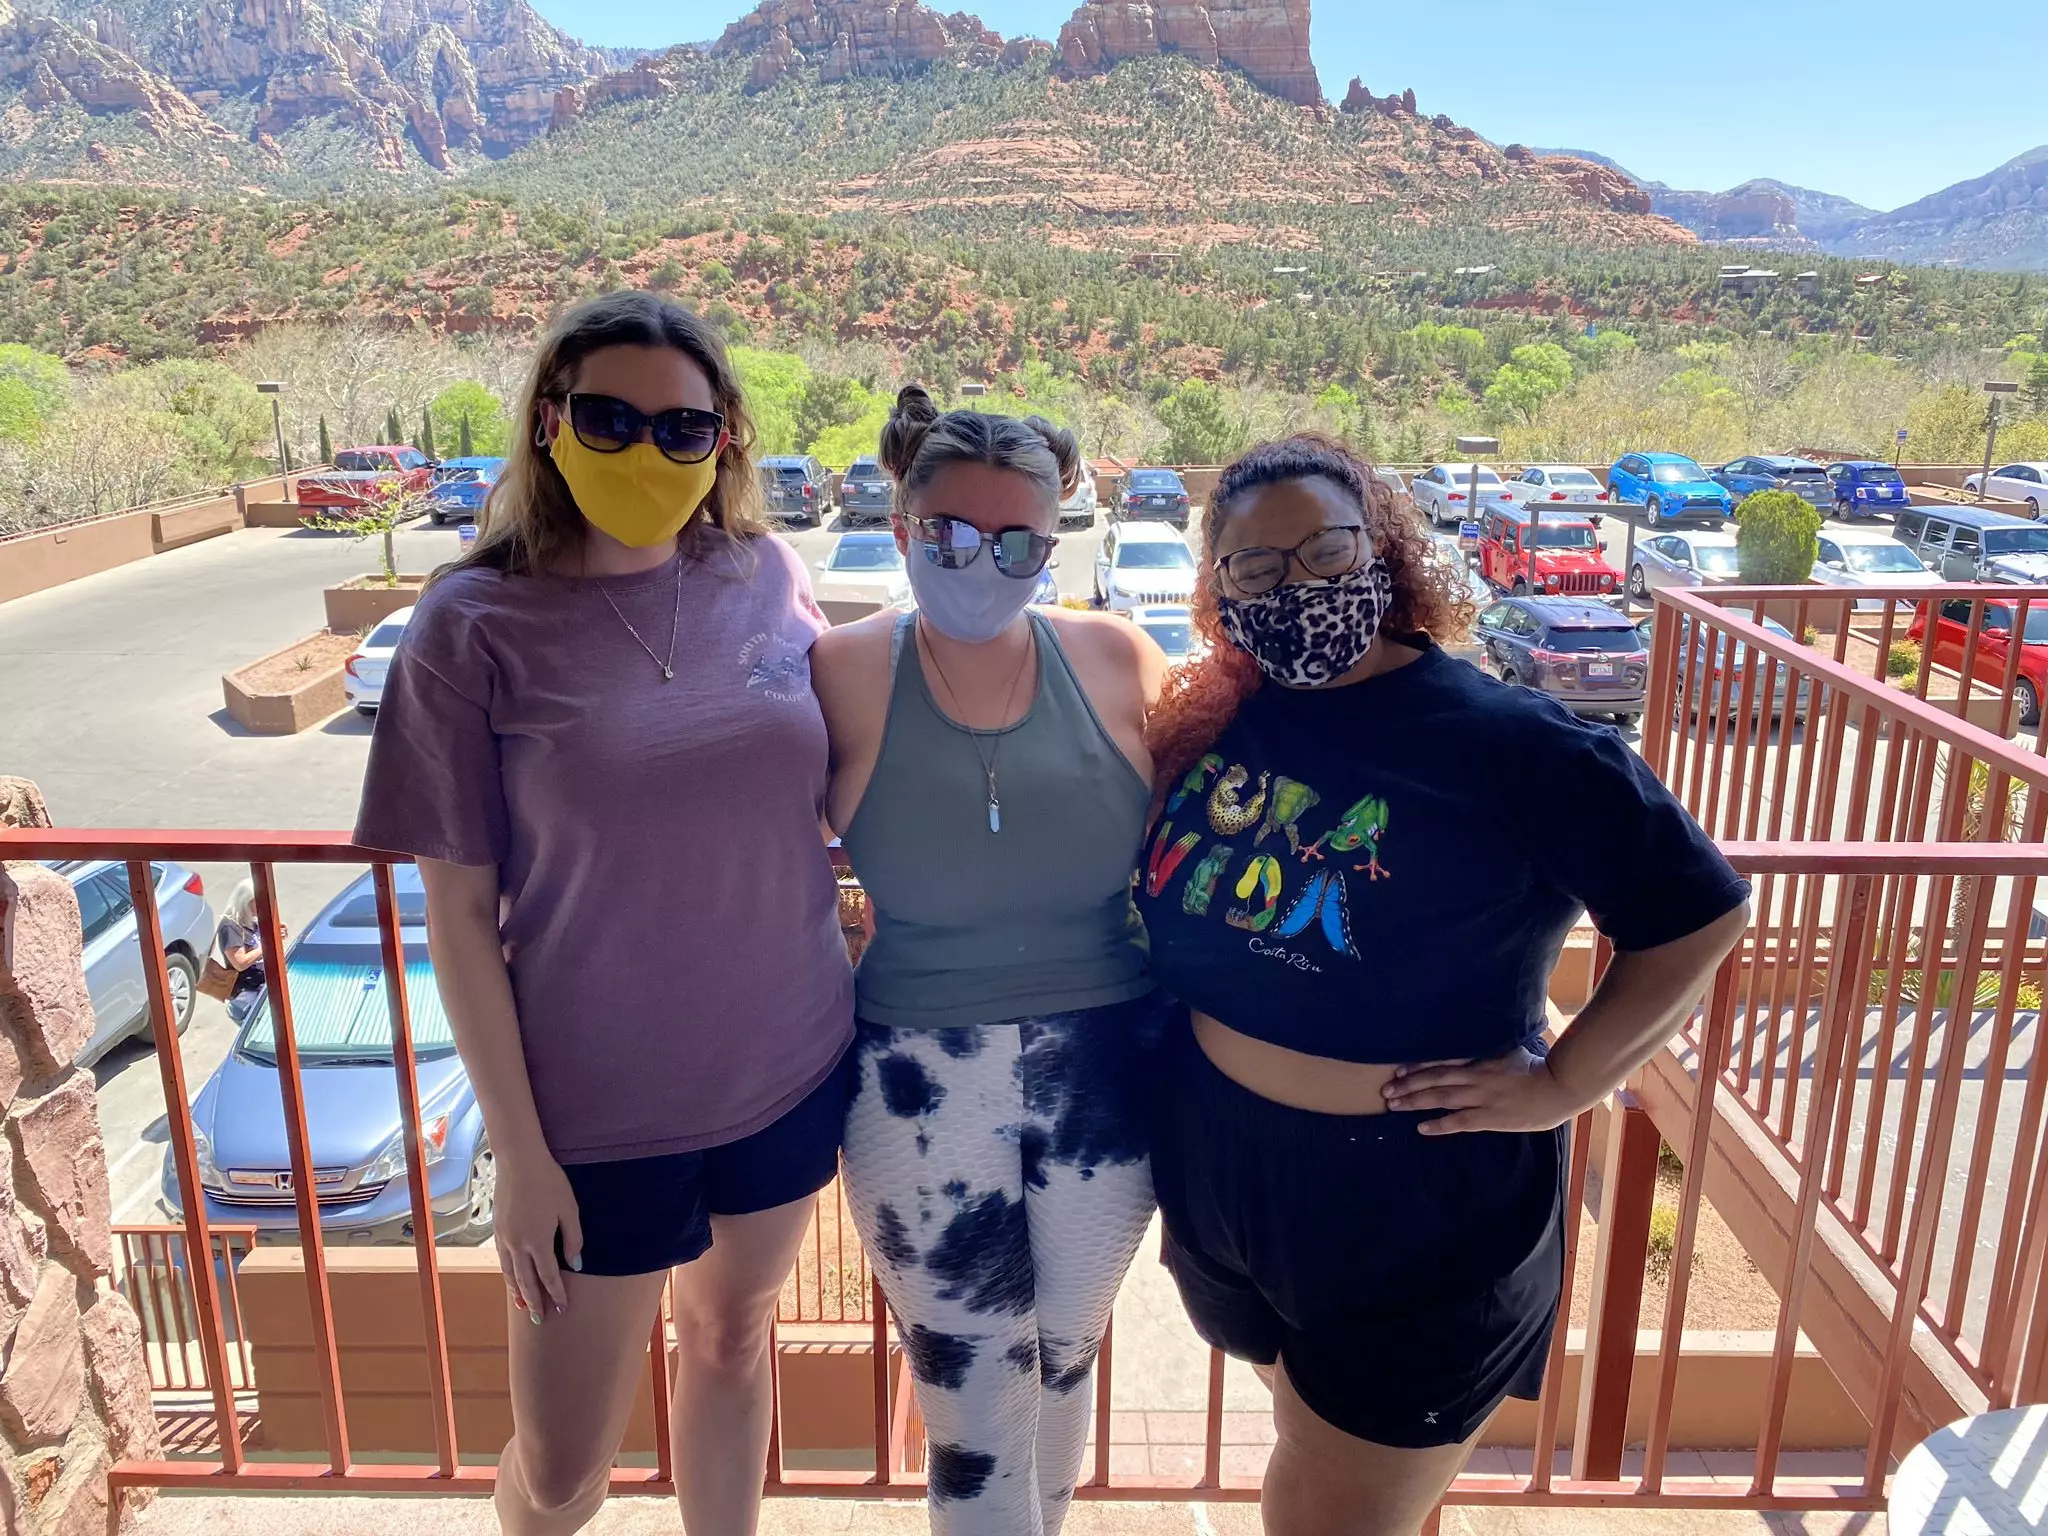 Bri (middle) with friends in Sedona.